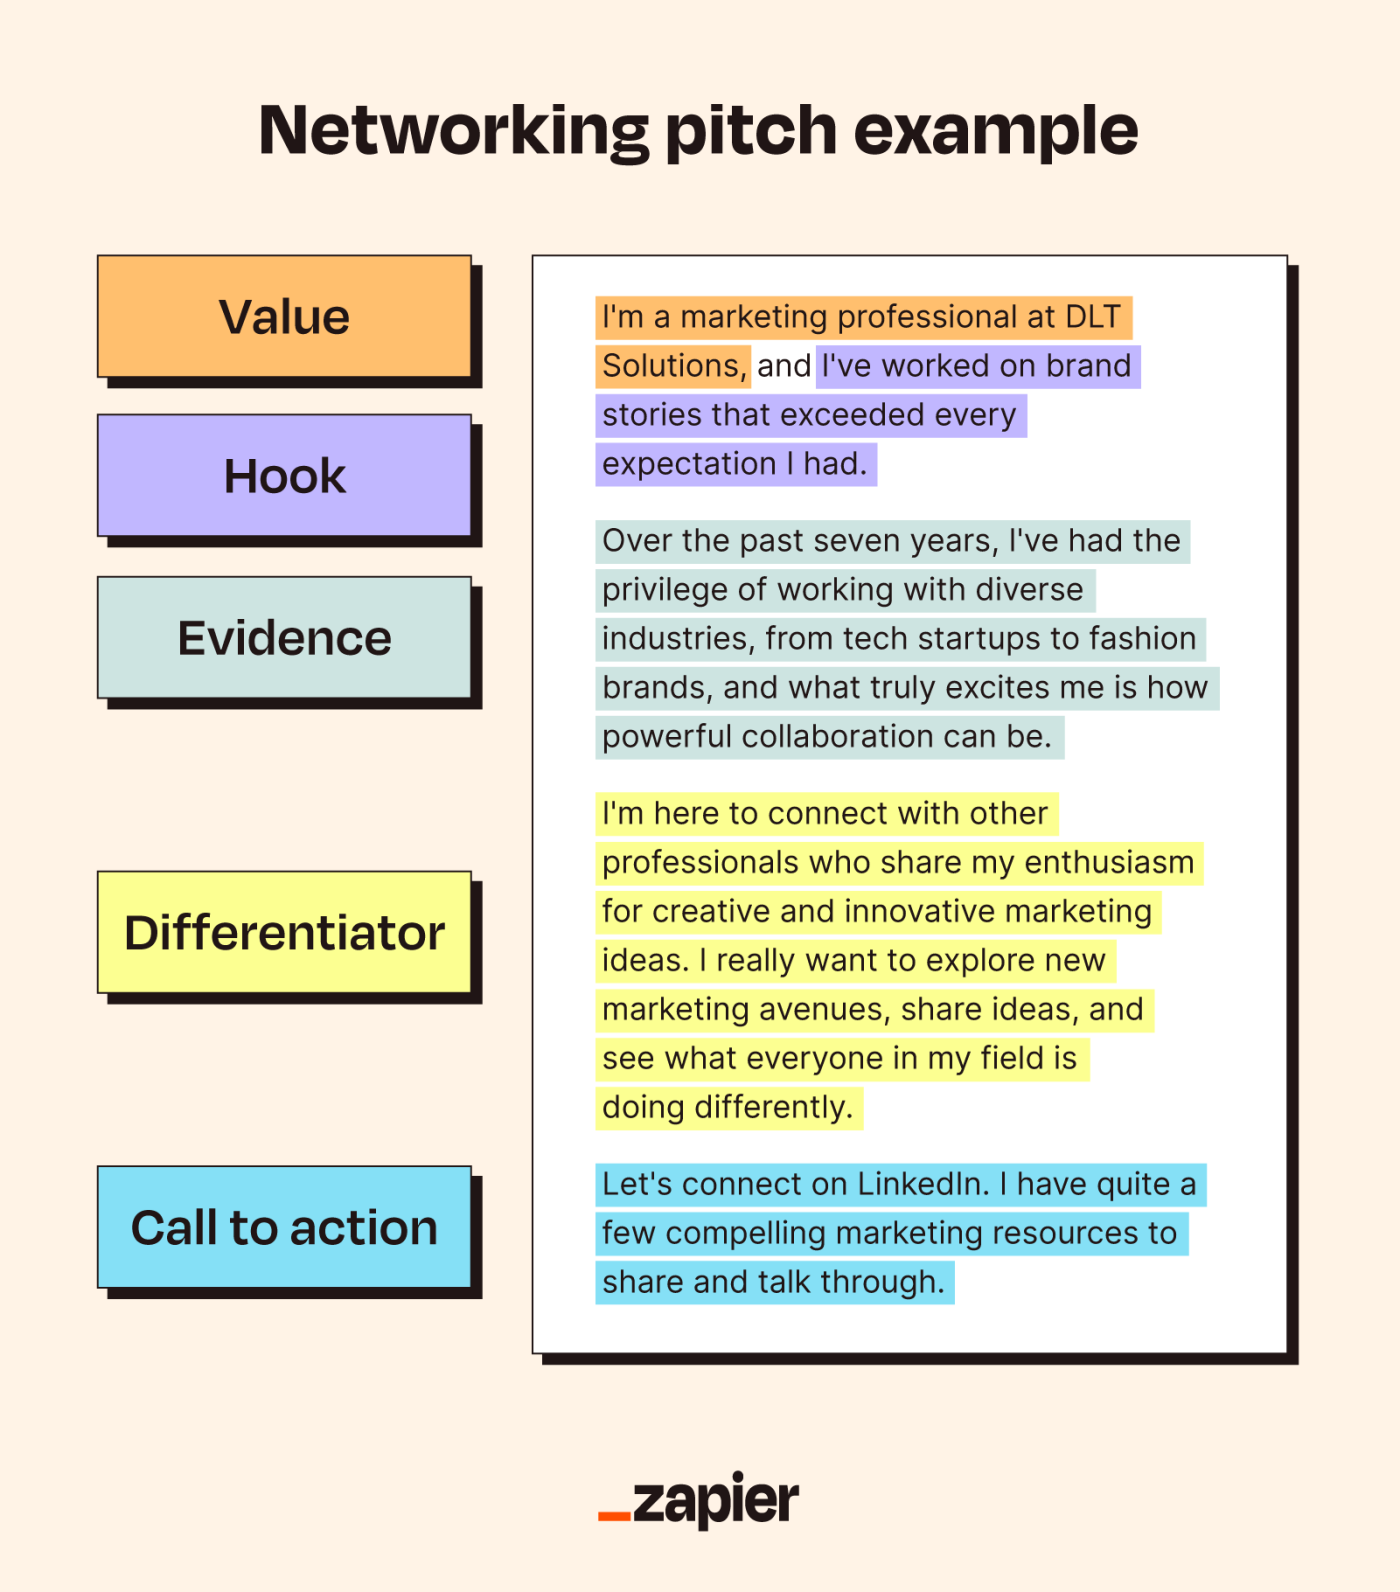 Example of an elevator pitch for someone who wants to network, with the hook, value, evidence, differentiator, and call to action highlighted in different colors